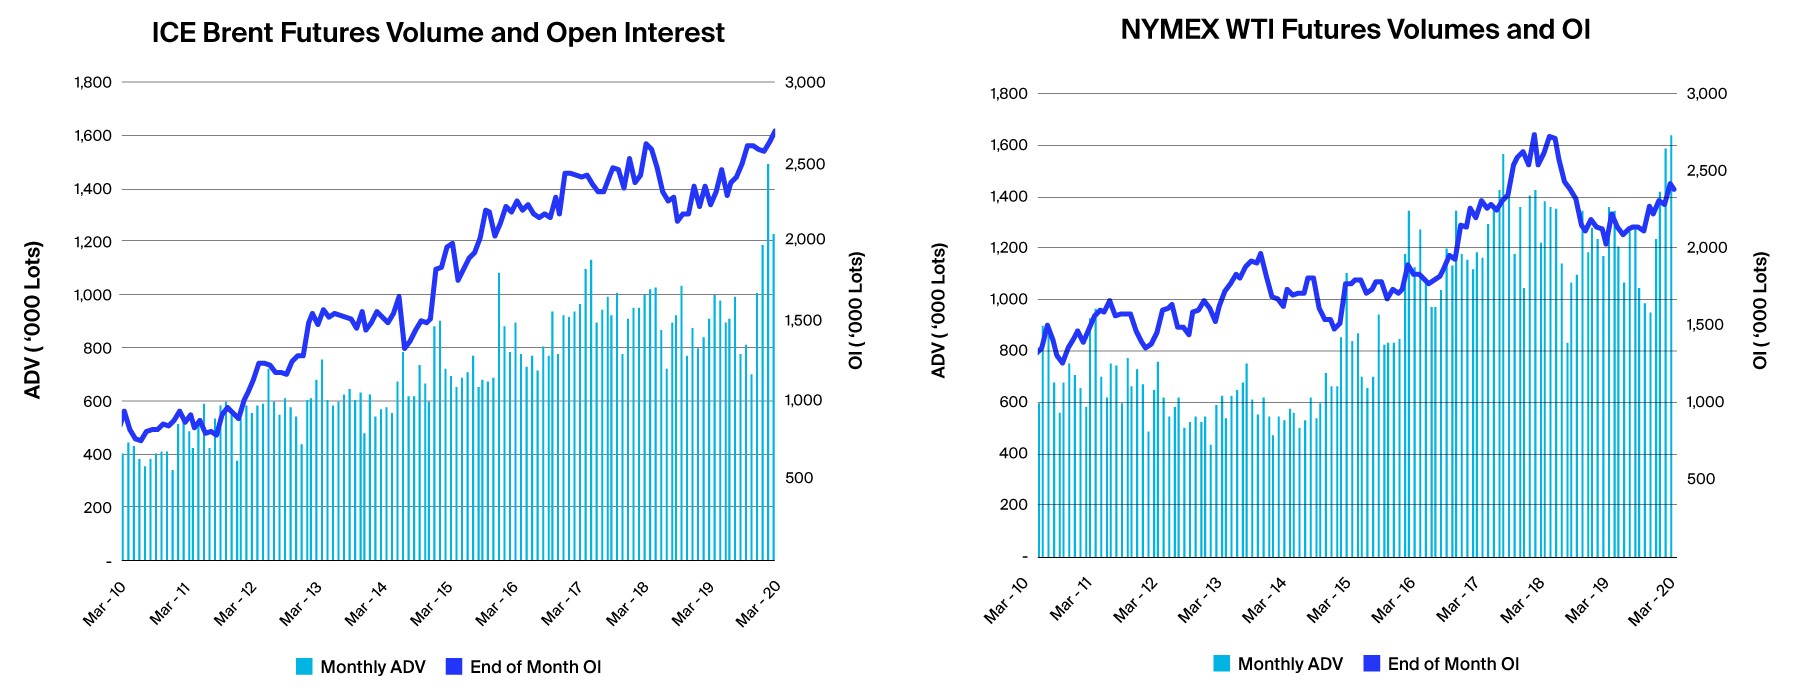 2 charts: left, ICE Brent Futures Volume and Open Interest; right, NYMEX WTI Futures Volumes and OP